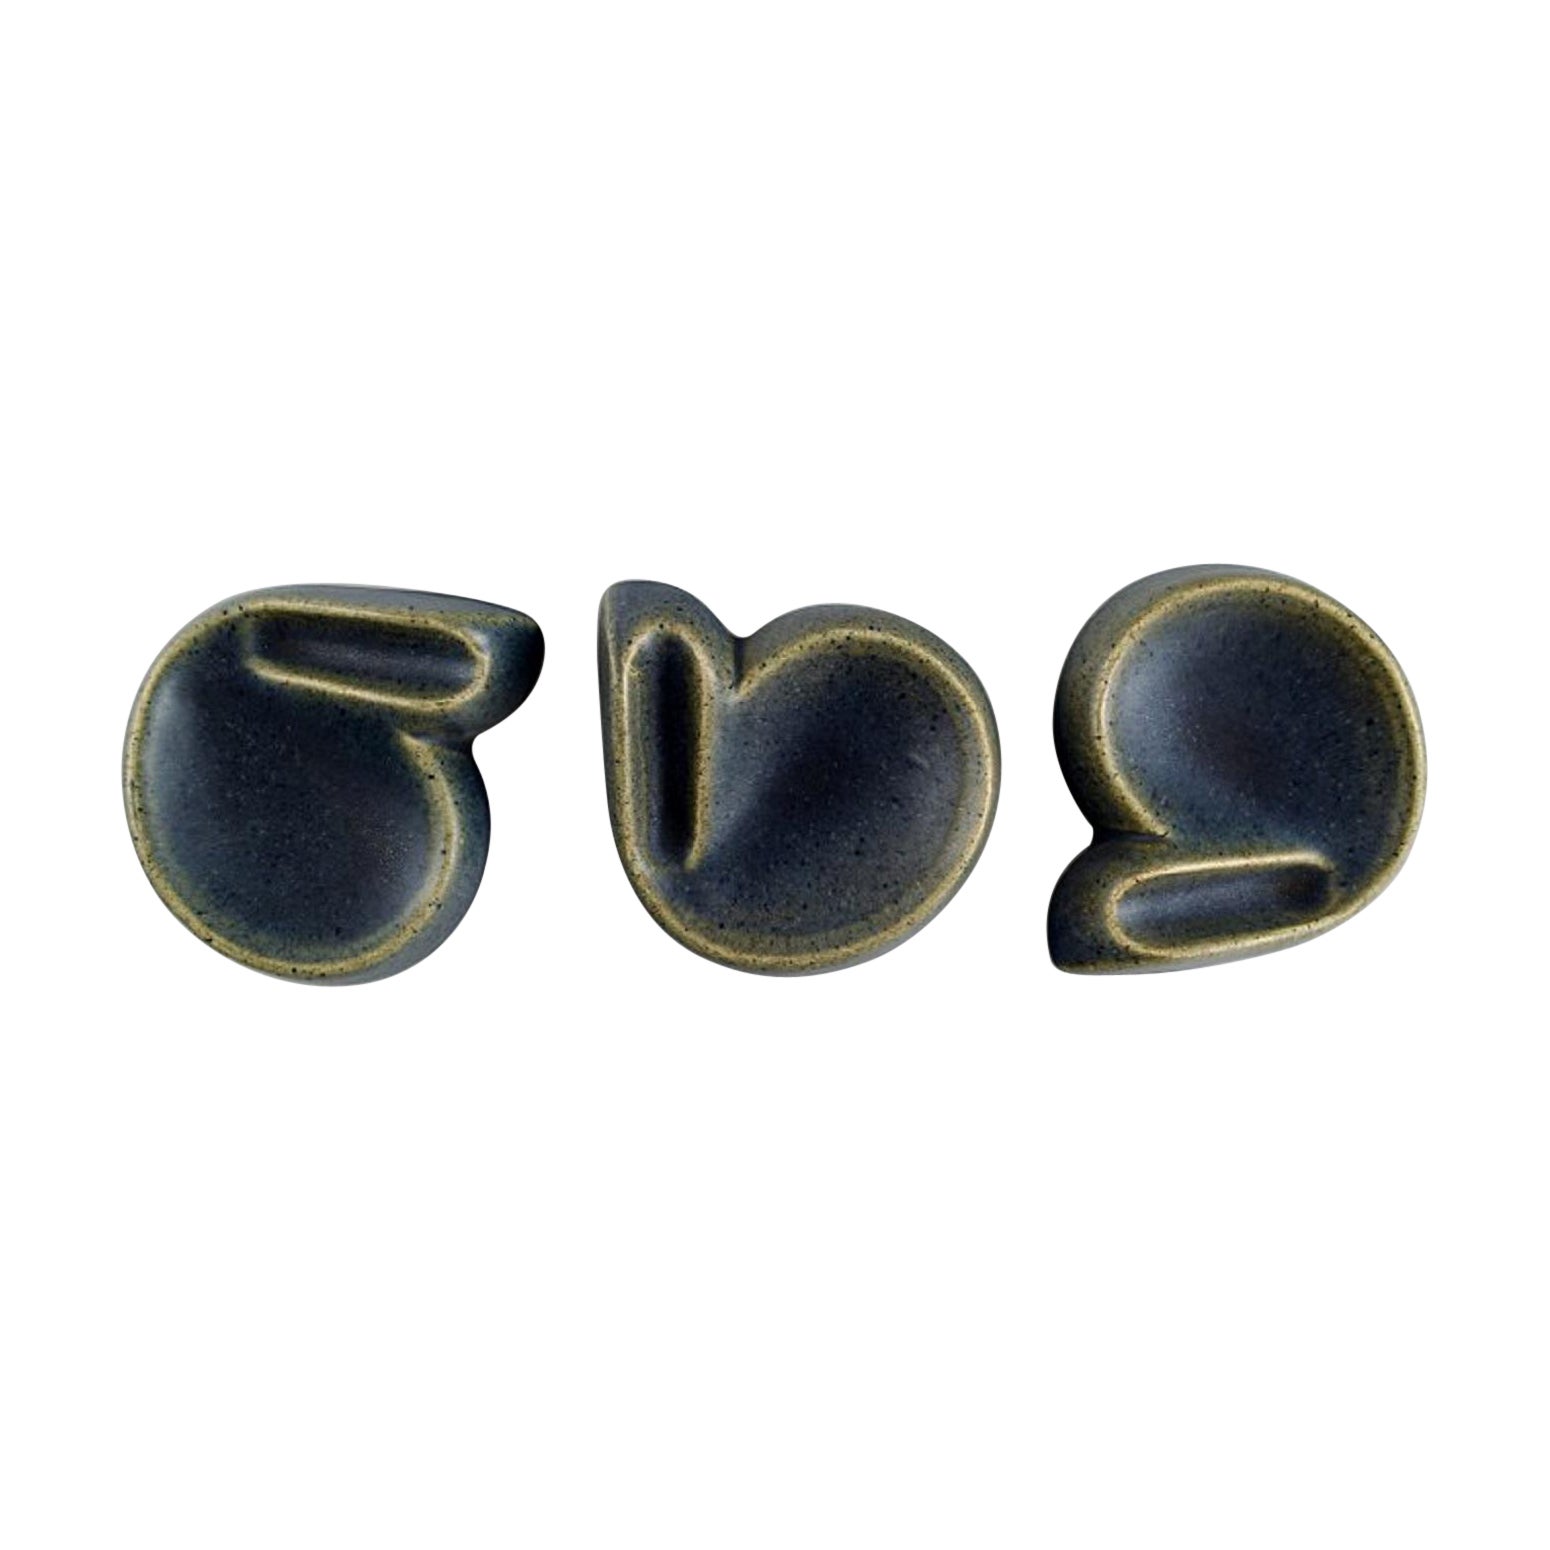 Syco, Sweden, Three Small Bowls in Glazed Stoneware, Mid-20th C For Sale